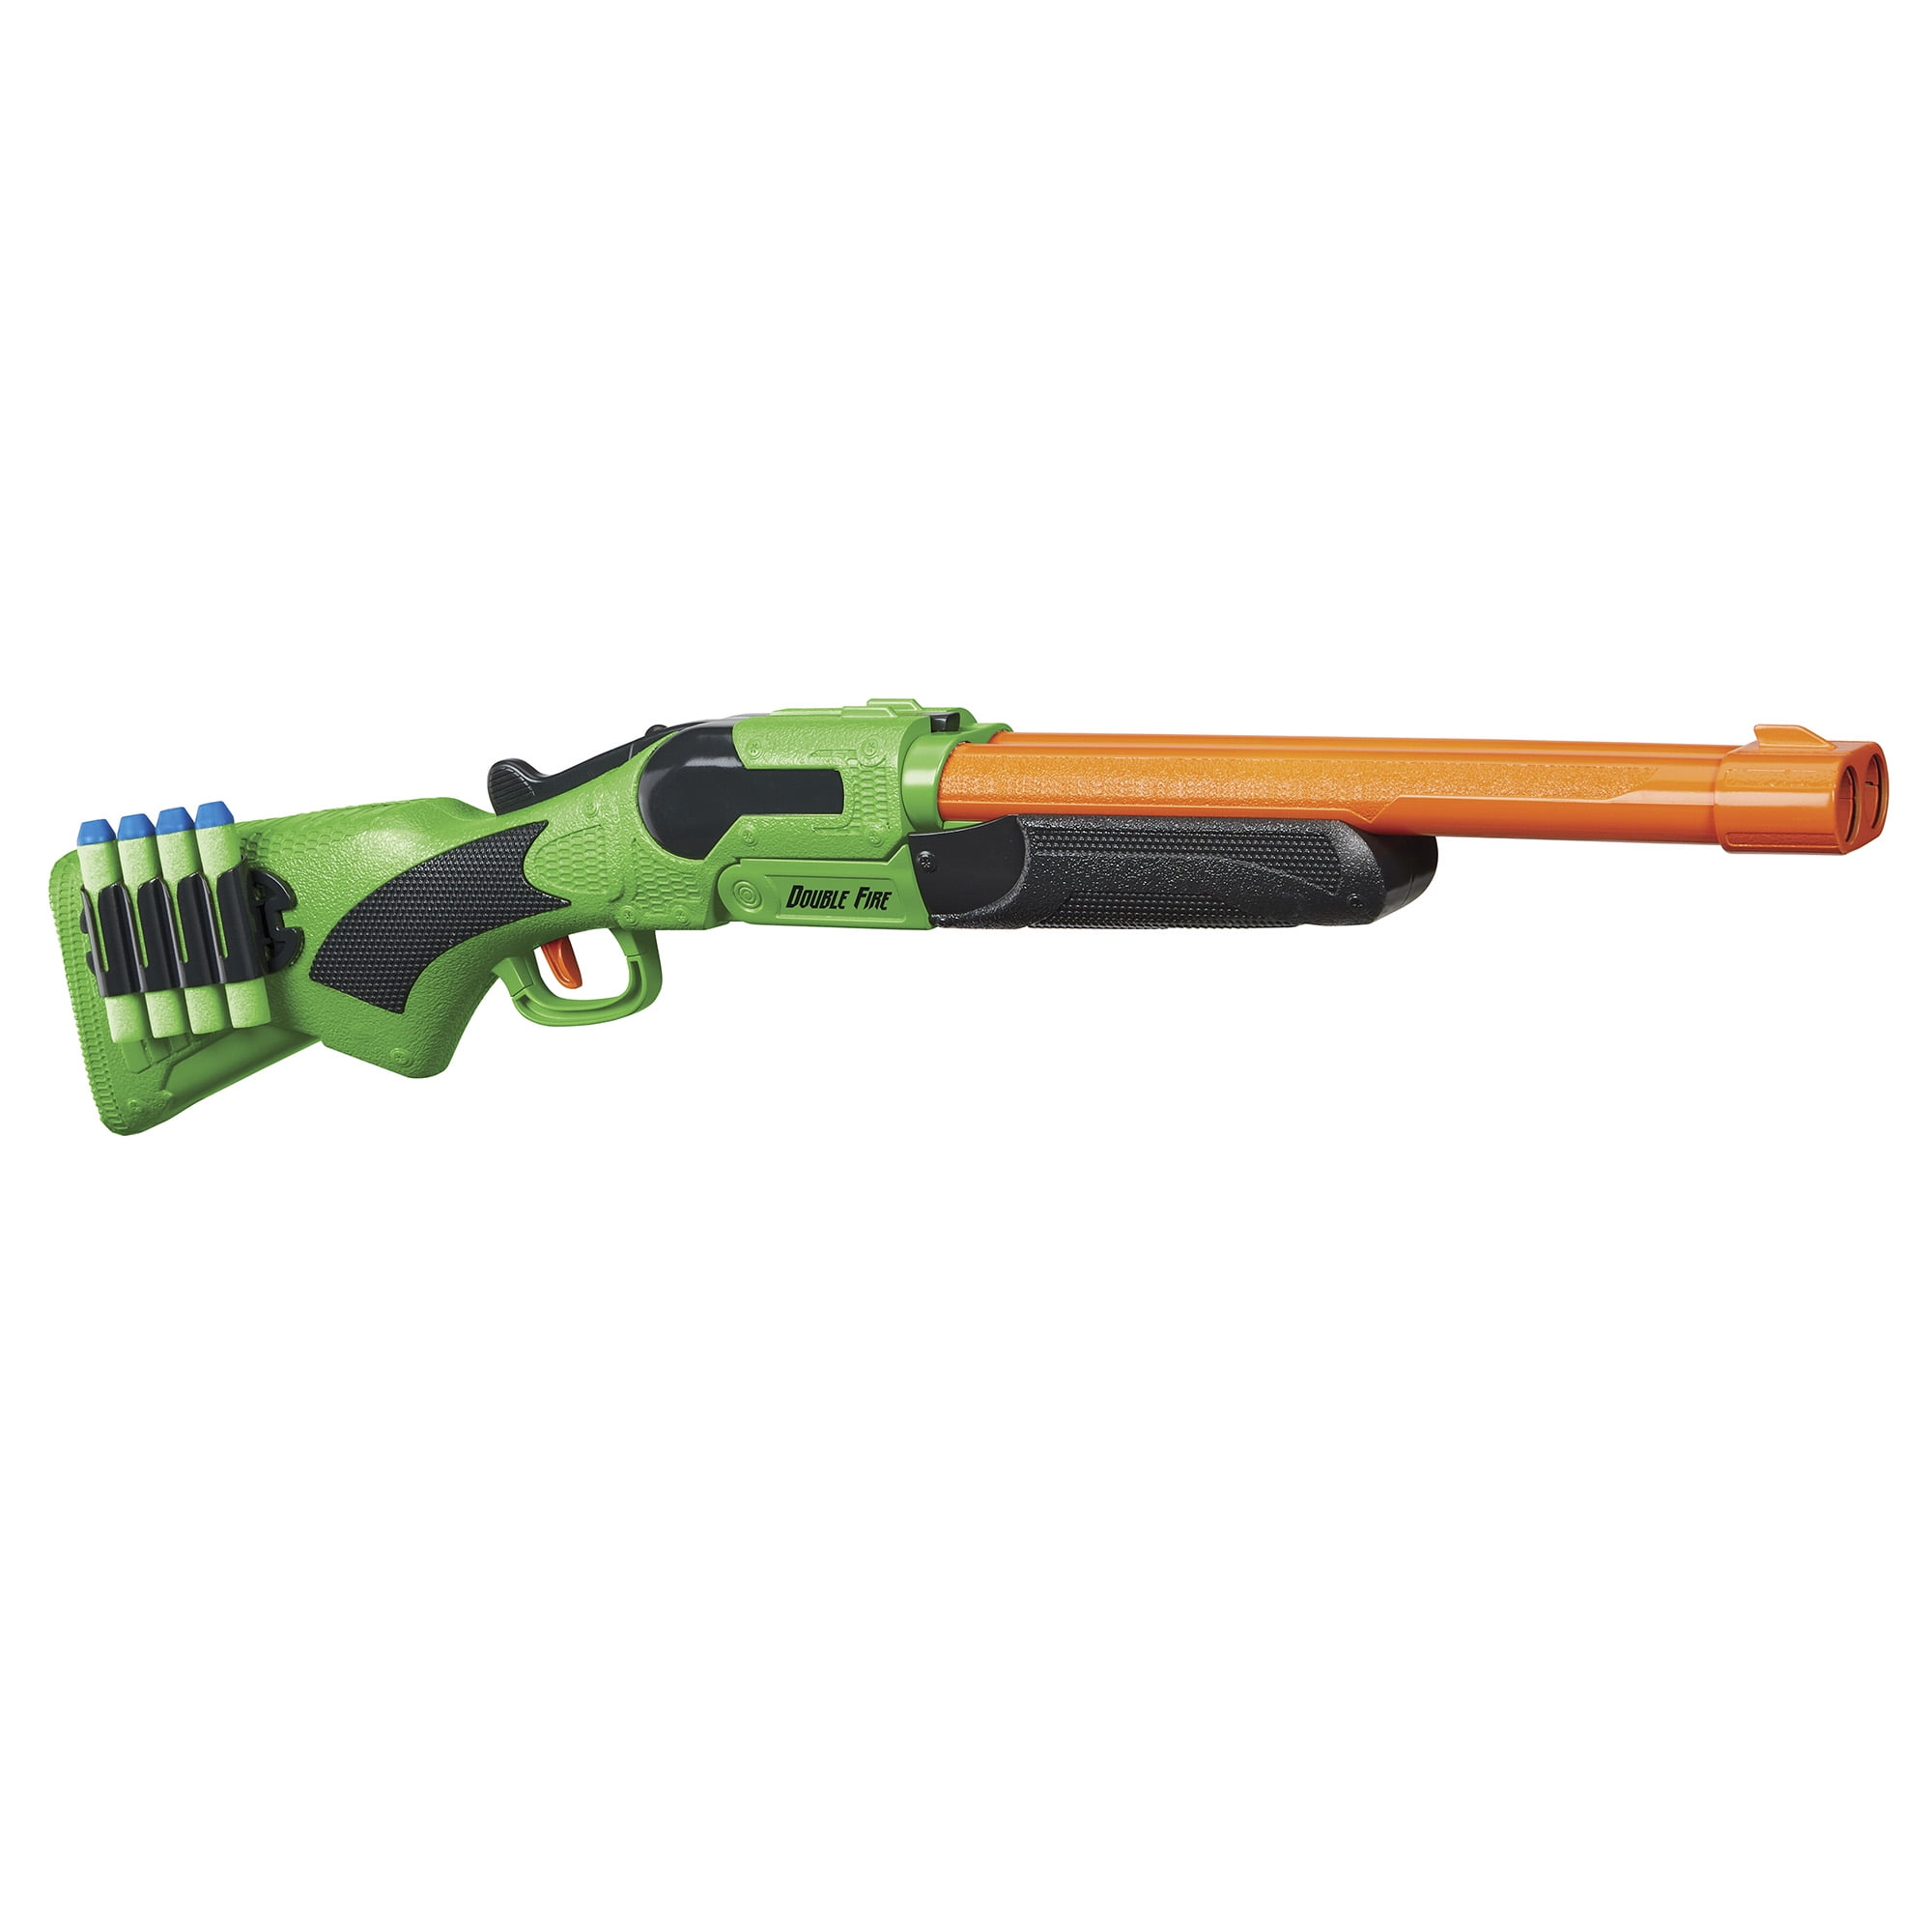 Adventure Force Double Fire Dart Blaster - Ages 8+ -